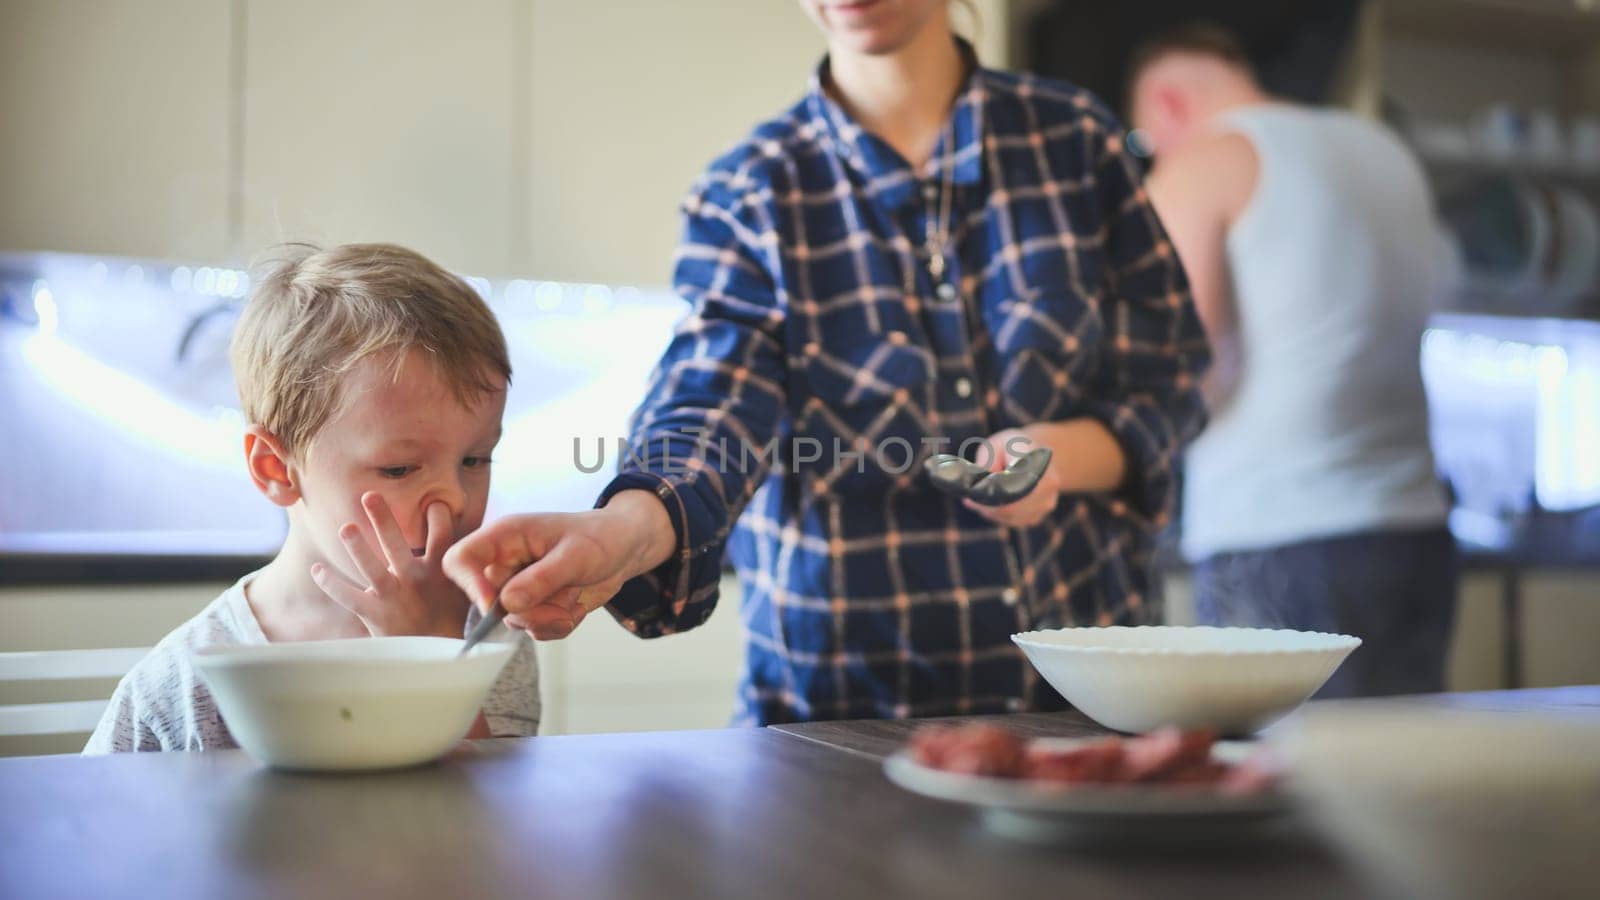 The child sits at the table in front of the bowl. The parents bring him a dish